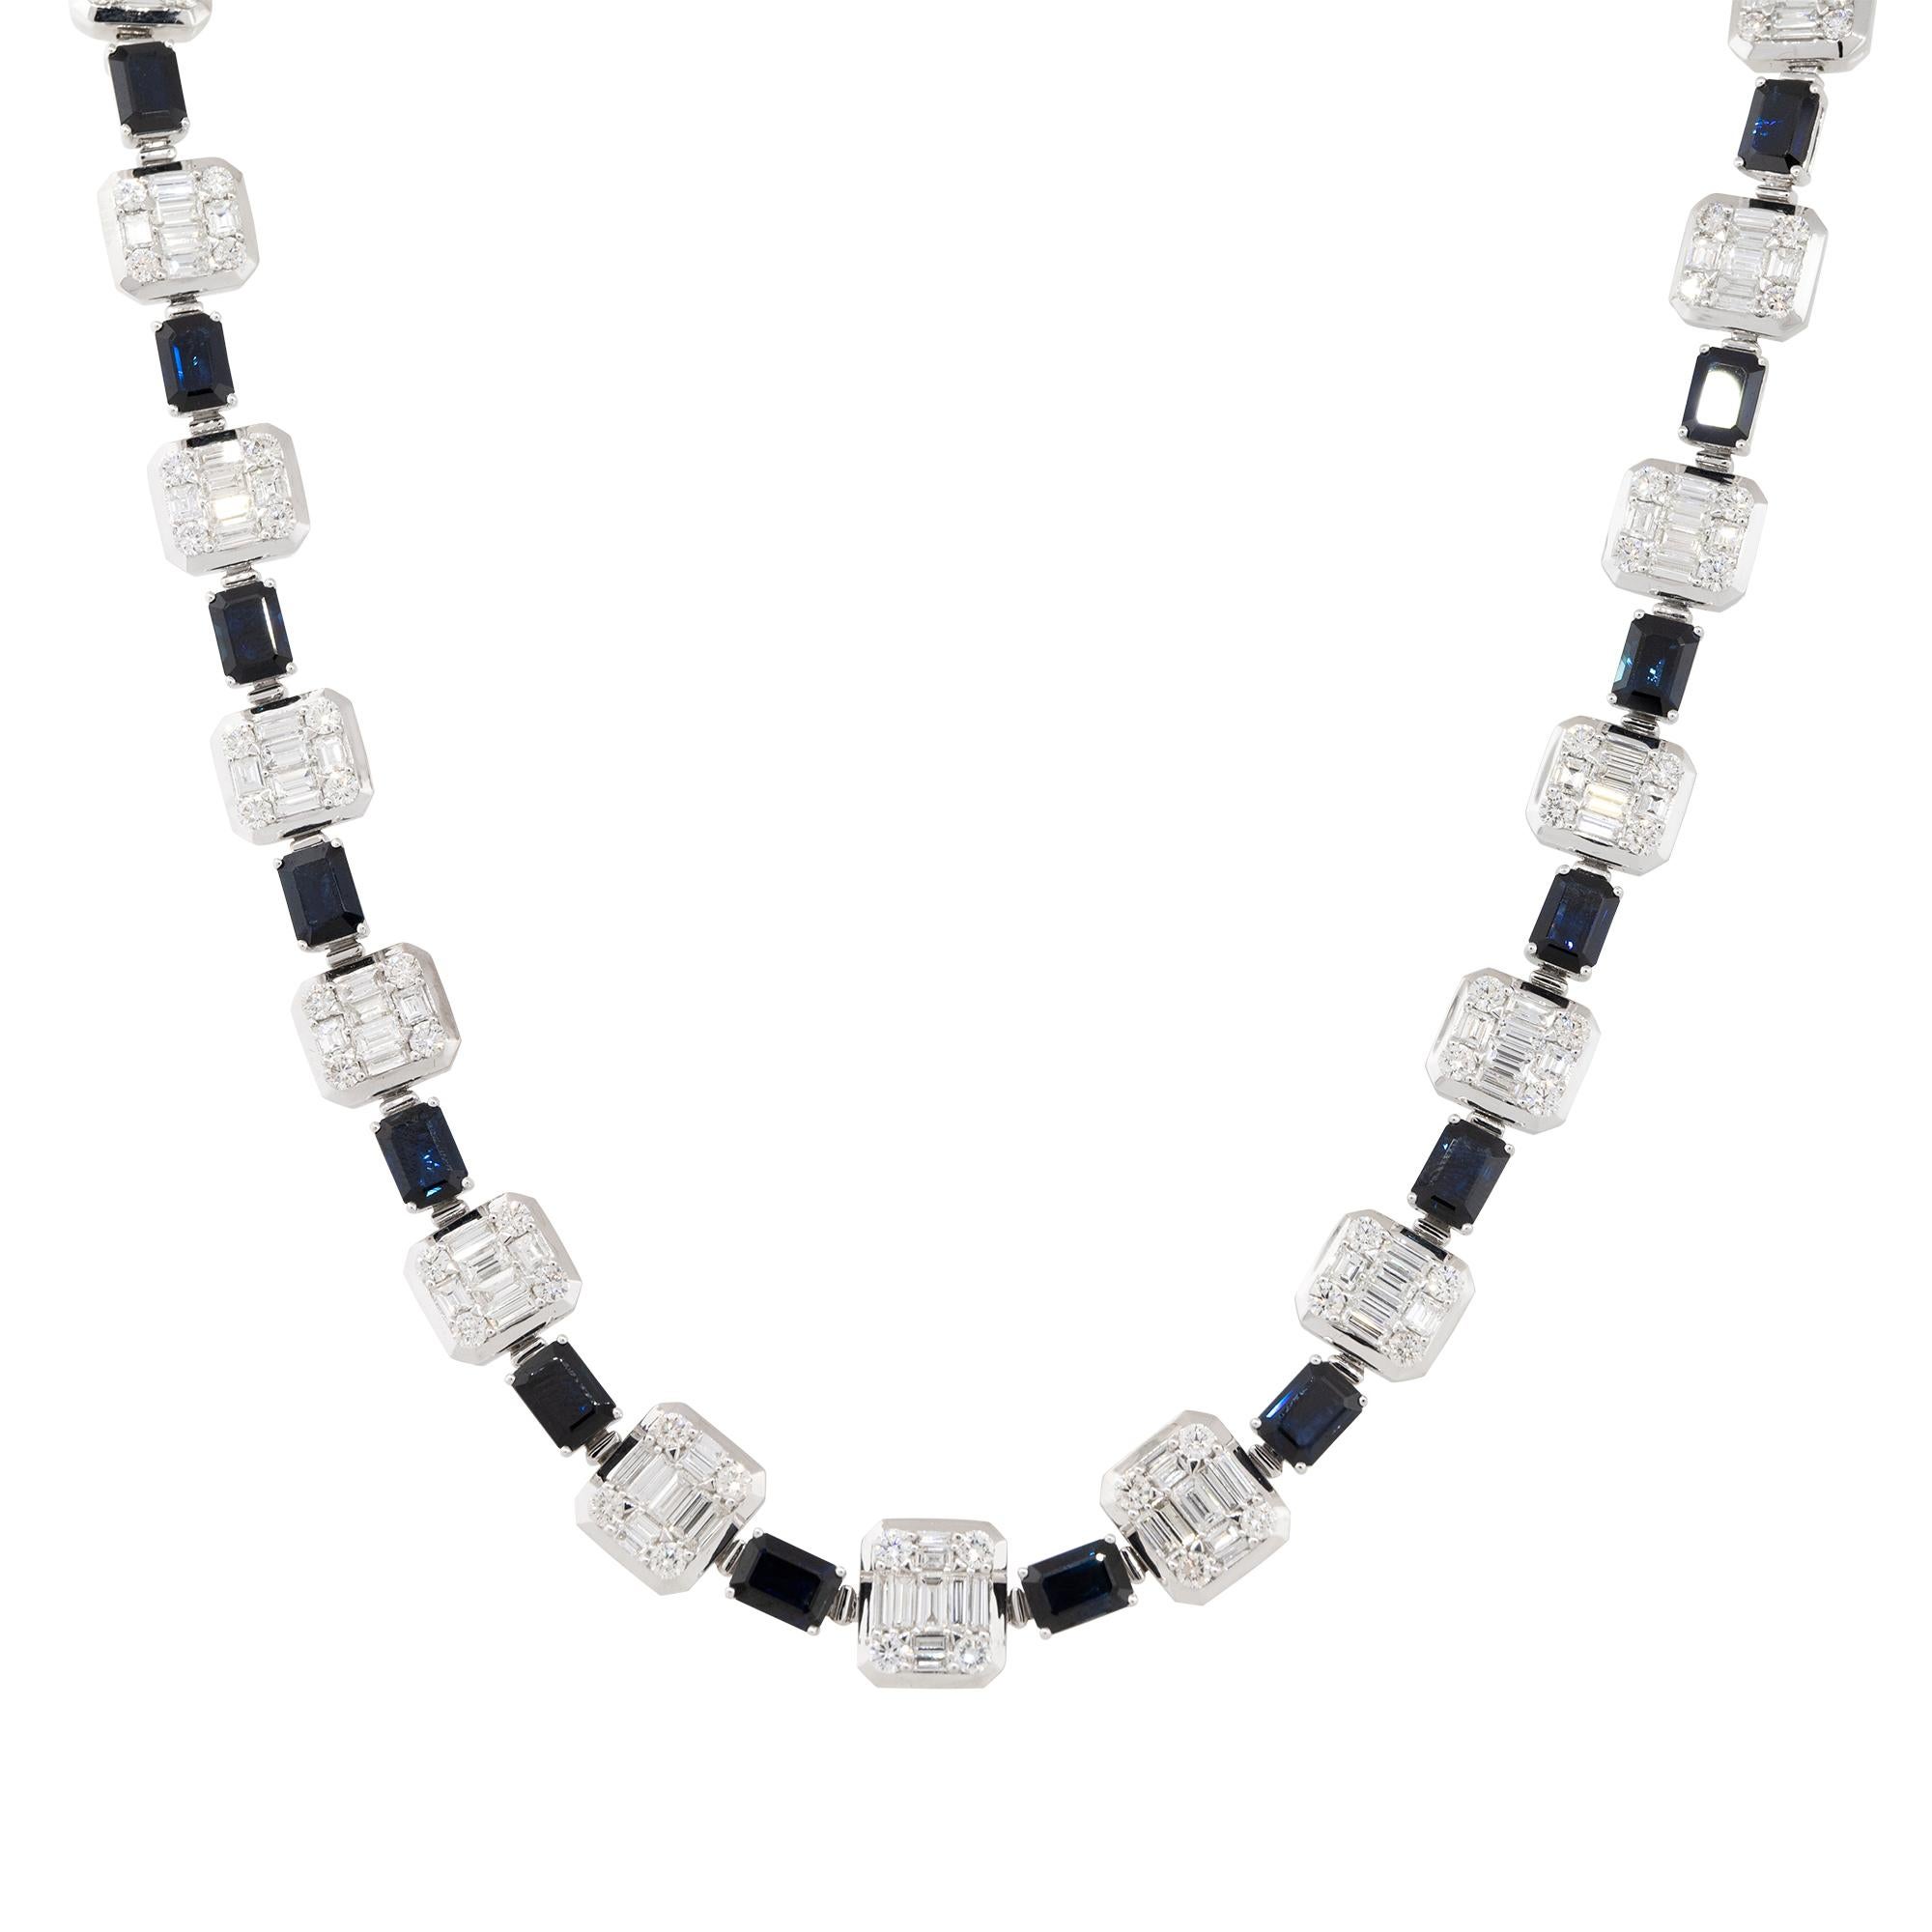 18k White Gold 23.77ctw Sapphire and Diamond Choker Necklace

Material: 18k White Gold
Gemstone Details: Approximately 23.77ctw of Emerald cut Sapphires. There are 22 Sapphires total
Diamond Details: Approximately 11.69ctw of Baguette Cut Diamonds